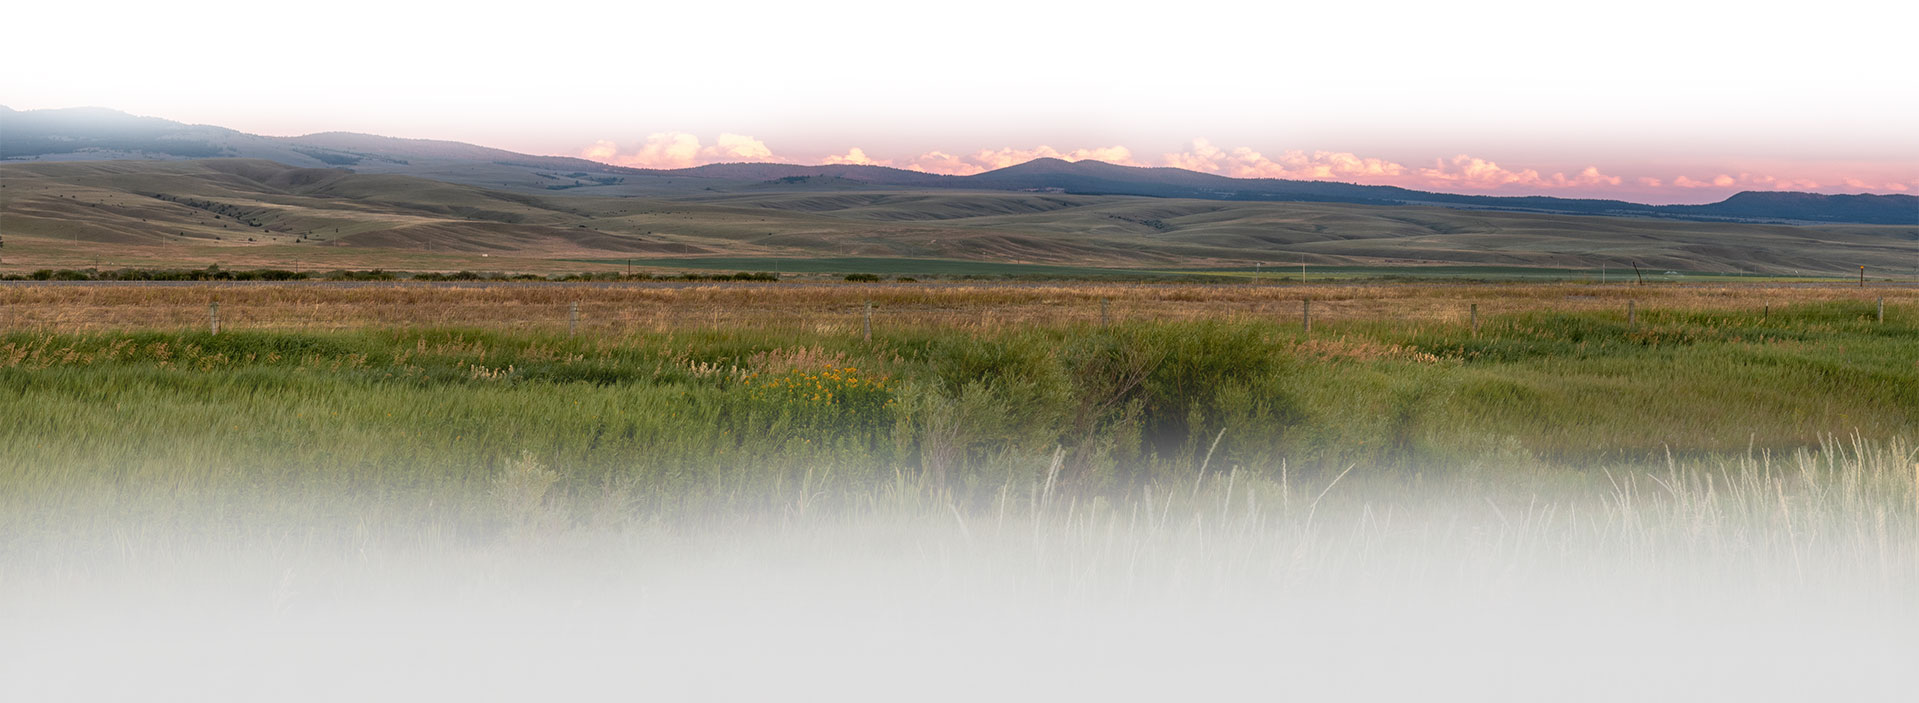 Banner picture of a grassy large field piece of land. There is mountains and hills in the distance.